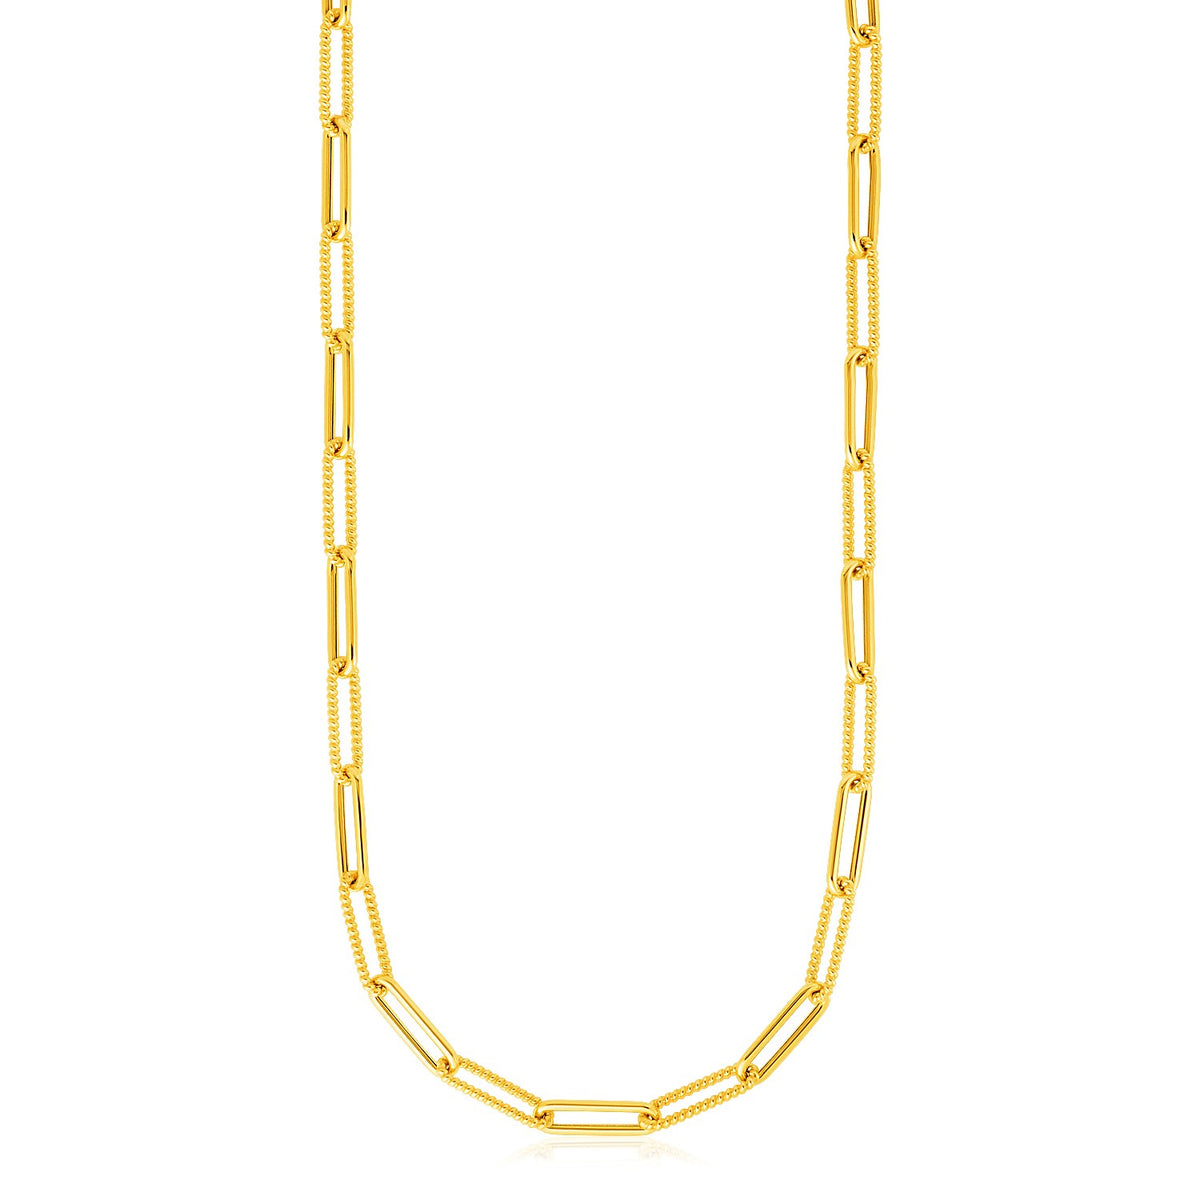 Textured Paperclip Chain - 14k Yellow Gold 3.50mm